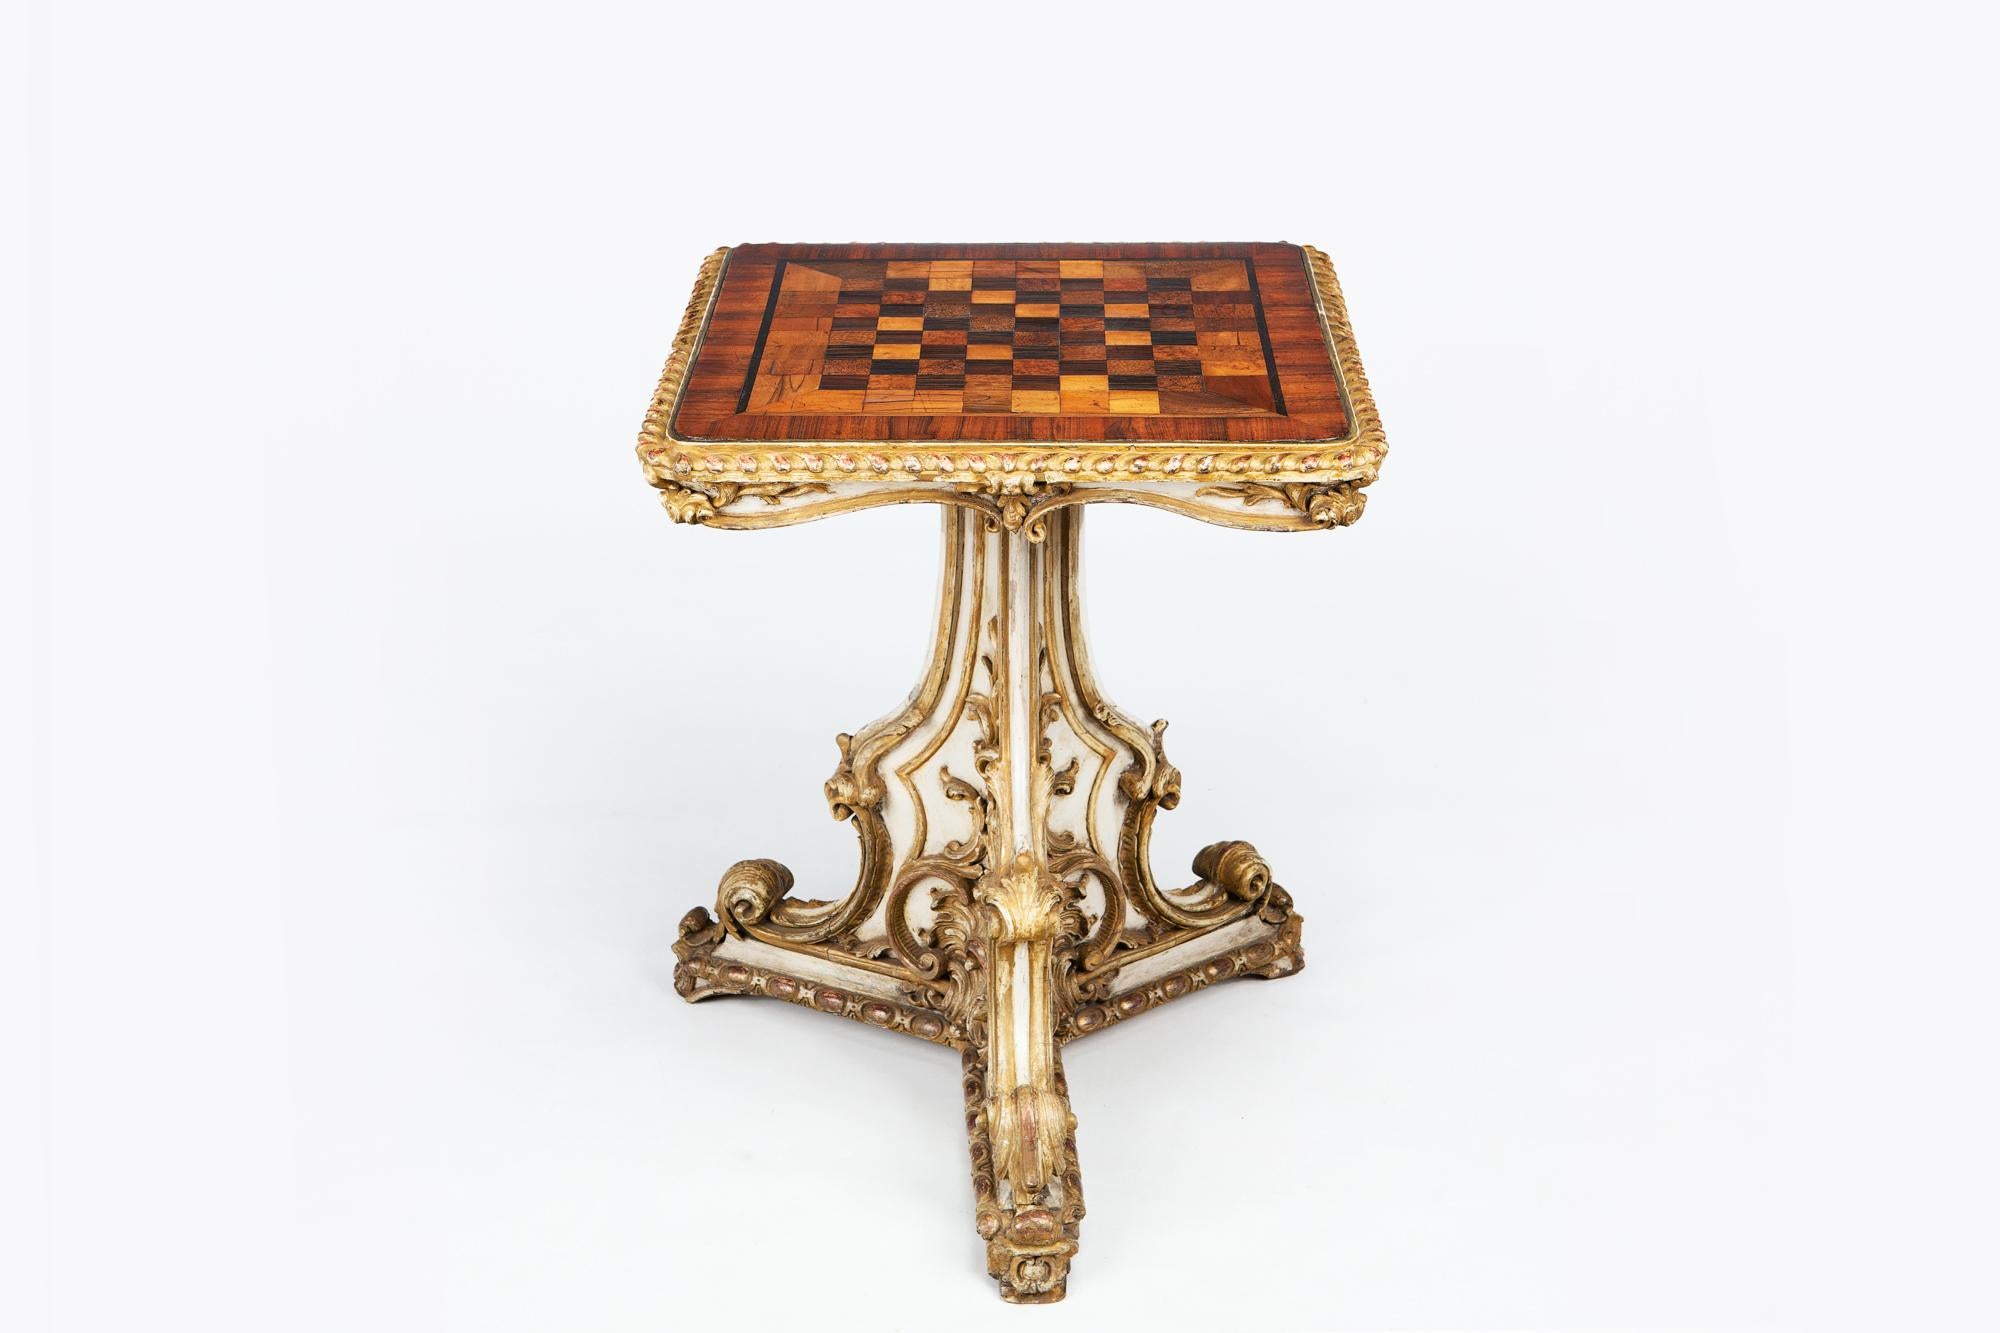 Early 19th century Regency games table, the moulded specimen top of square form with gadrooned and crossbanded rim. Inlaid ebonized line inlay and squares of satinwood, burr walnut, birds eye maple and zebrawood raised over painted and parcel gilt